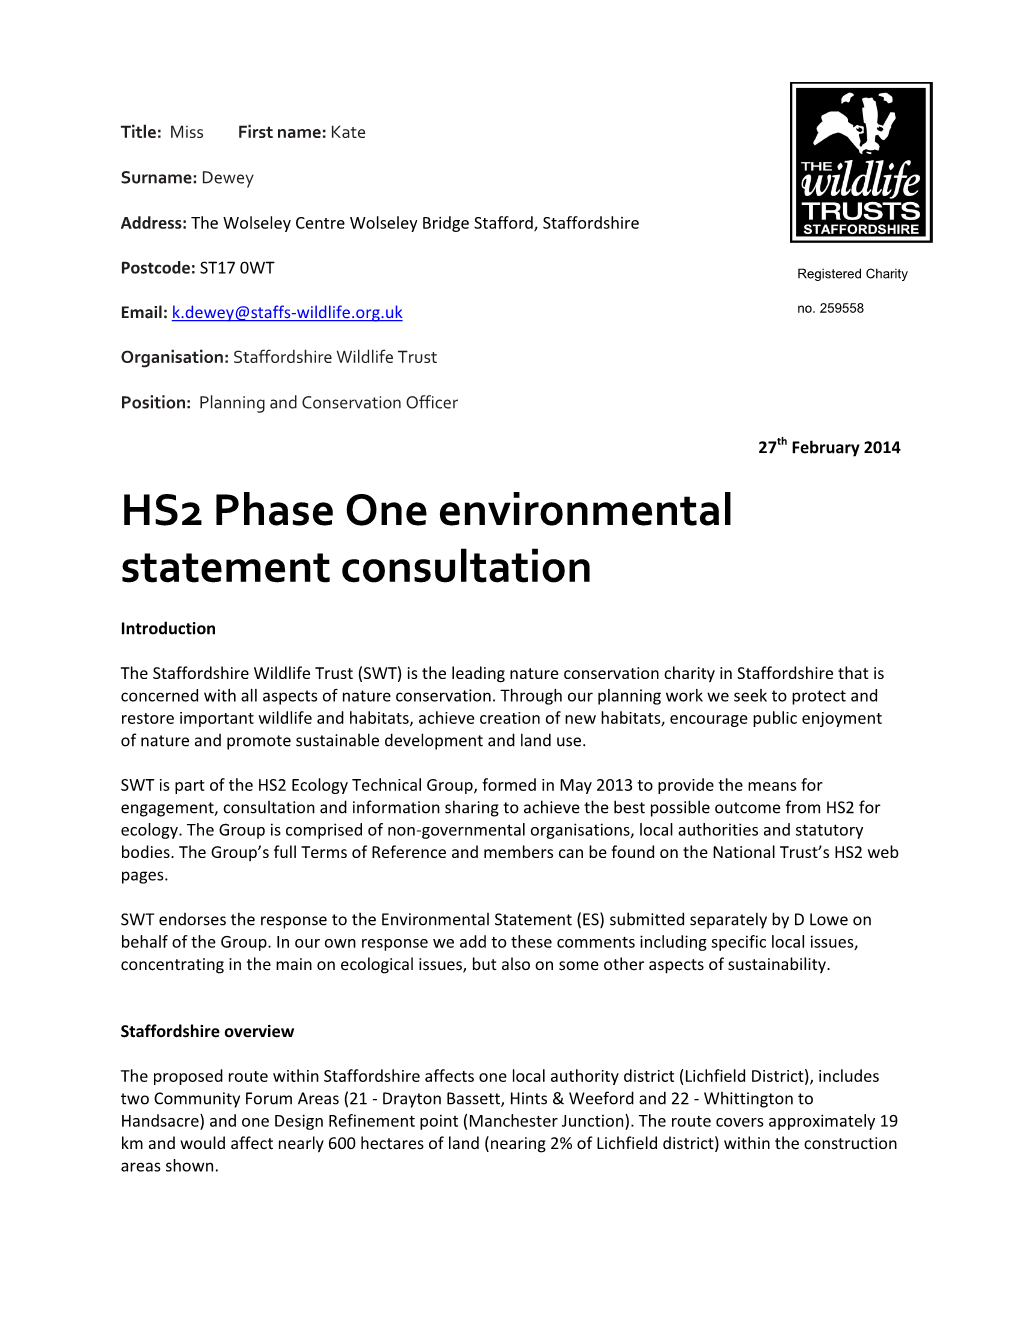 HS2 Phase One Environmental Statement Consultation